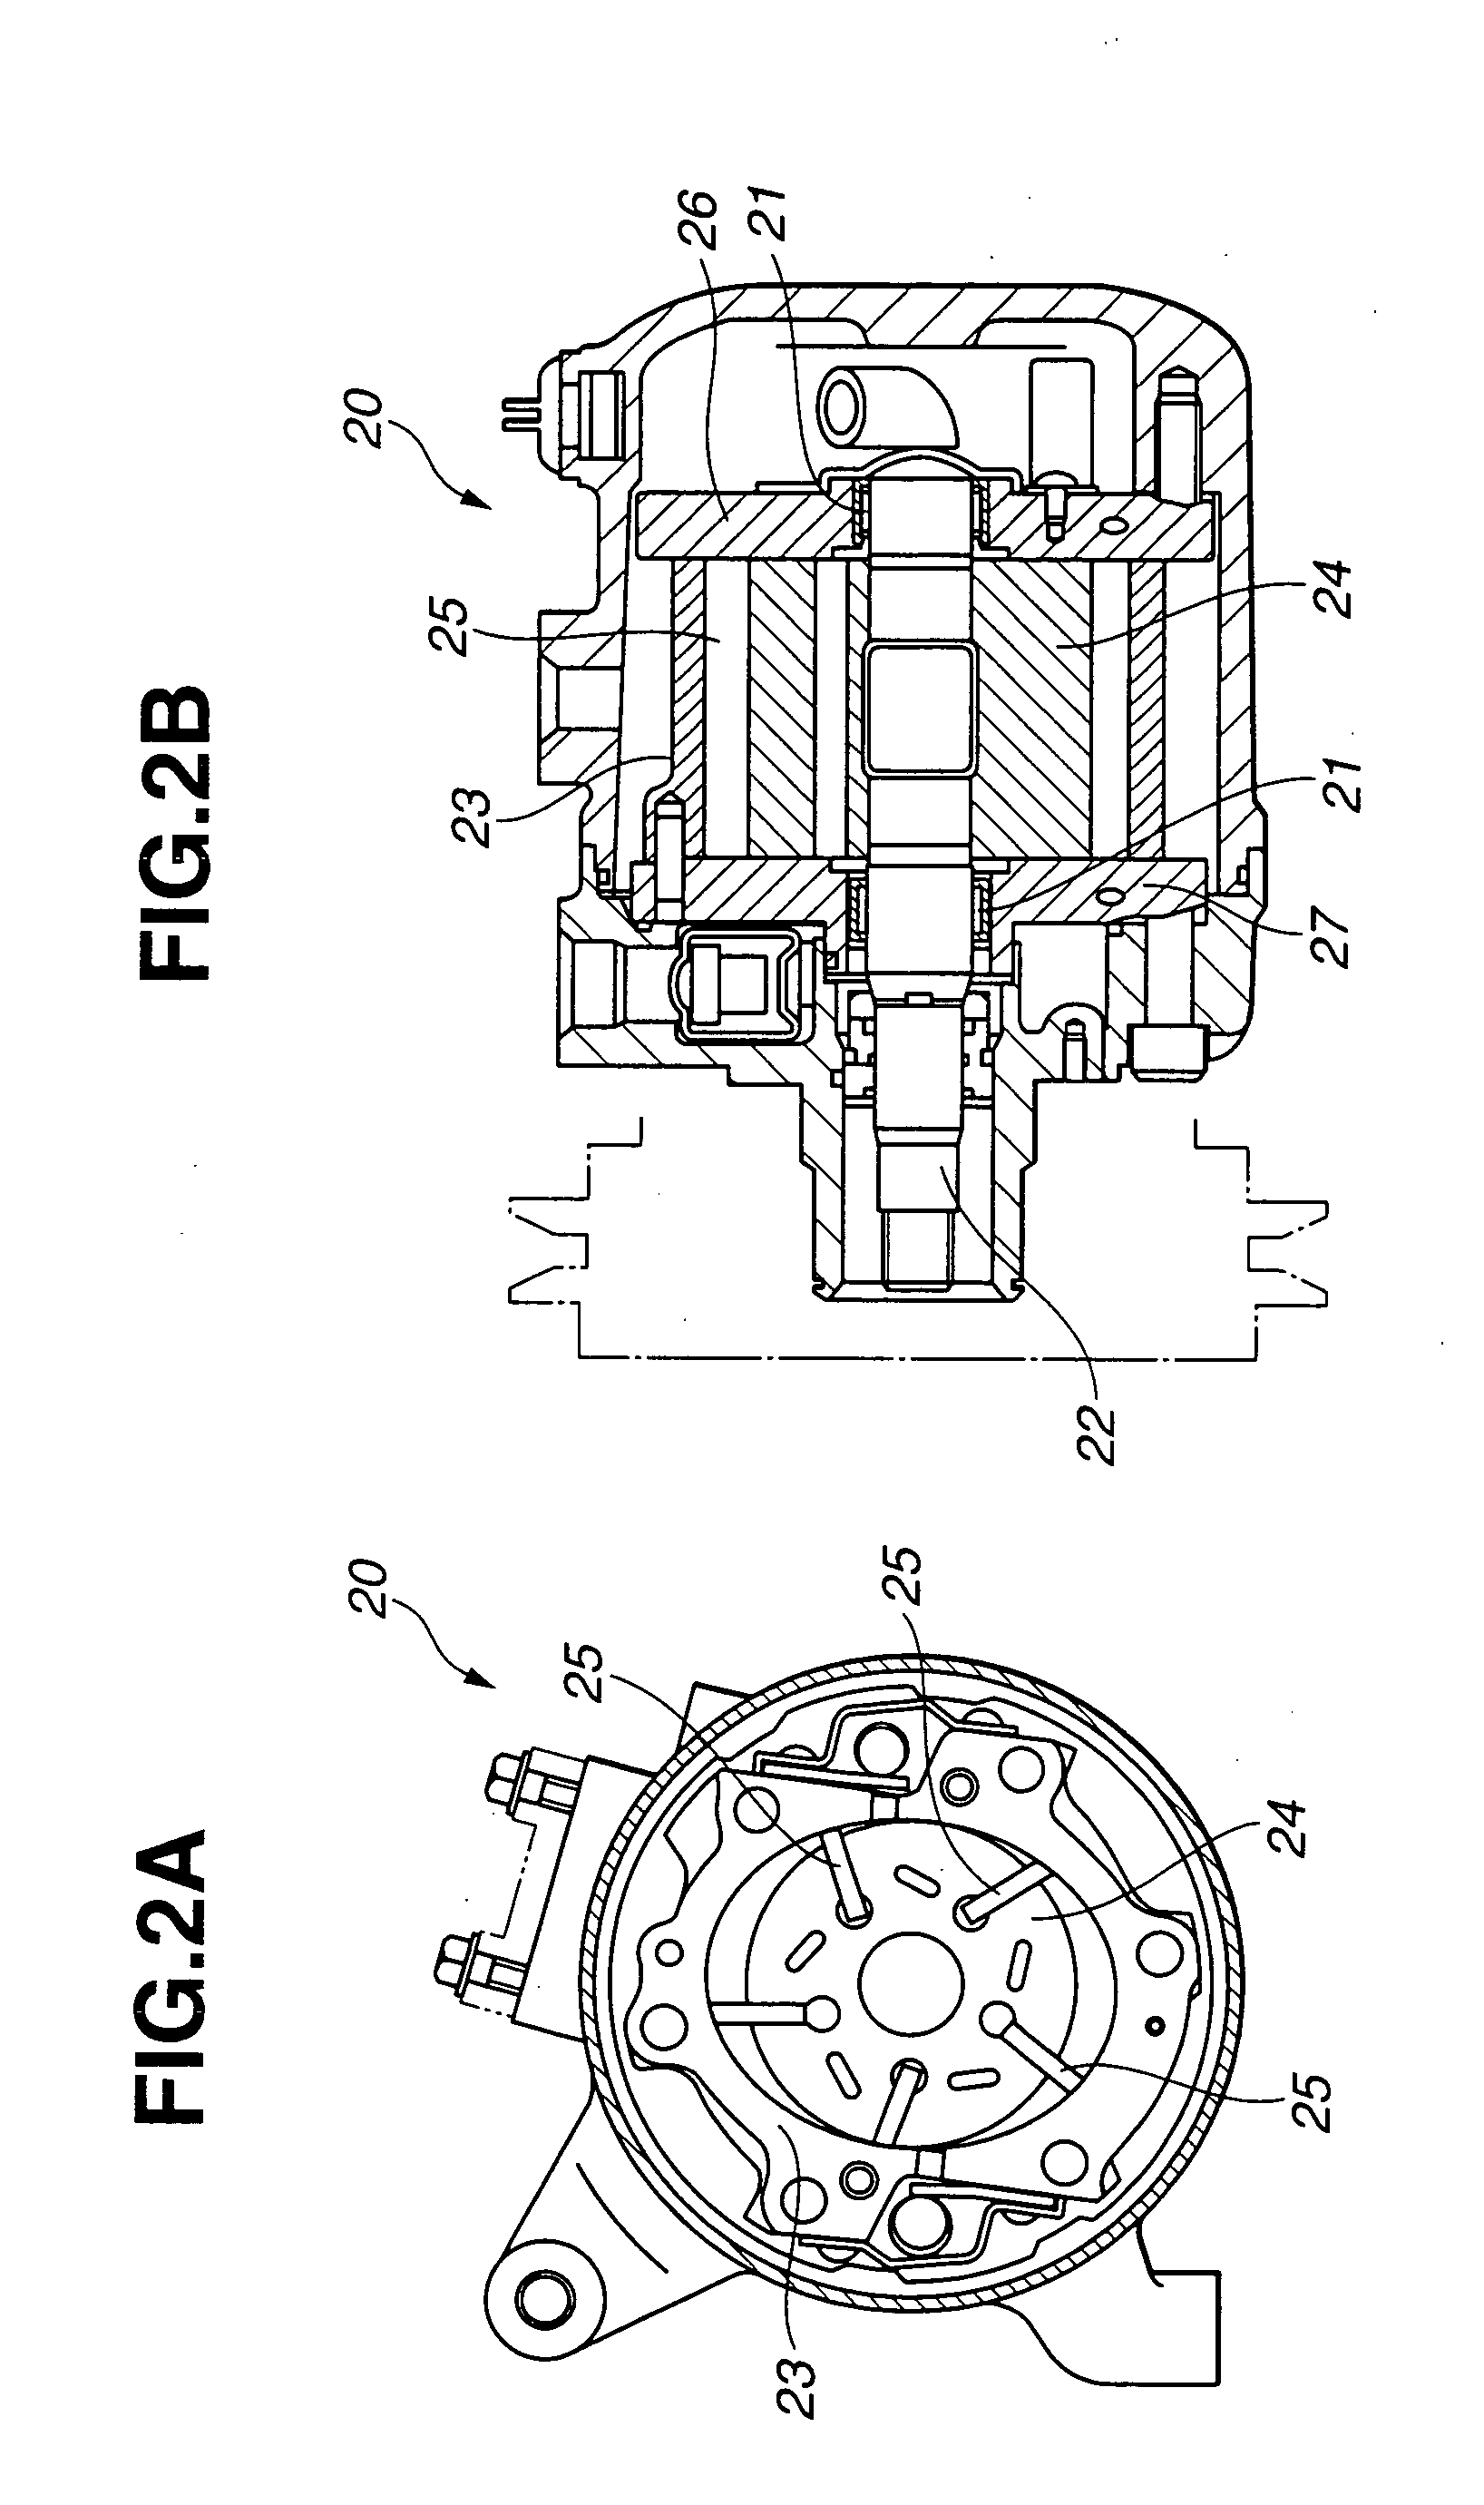 Refrigerant compressor and friction control process therefor